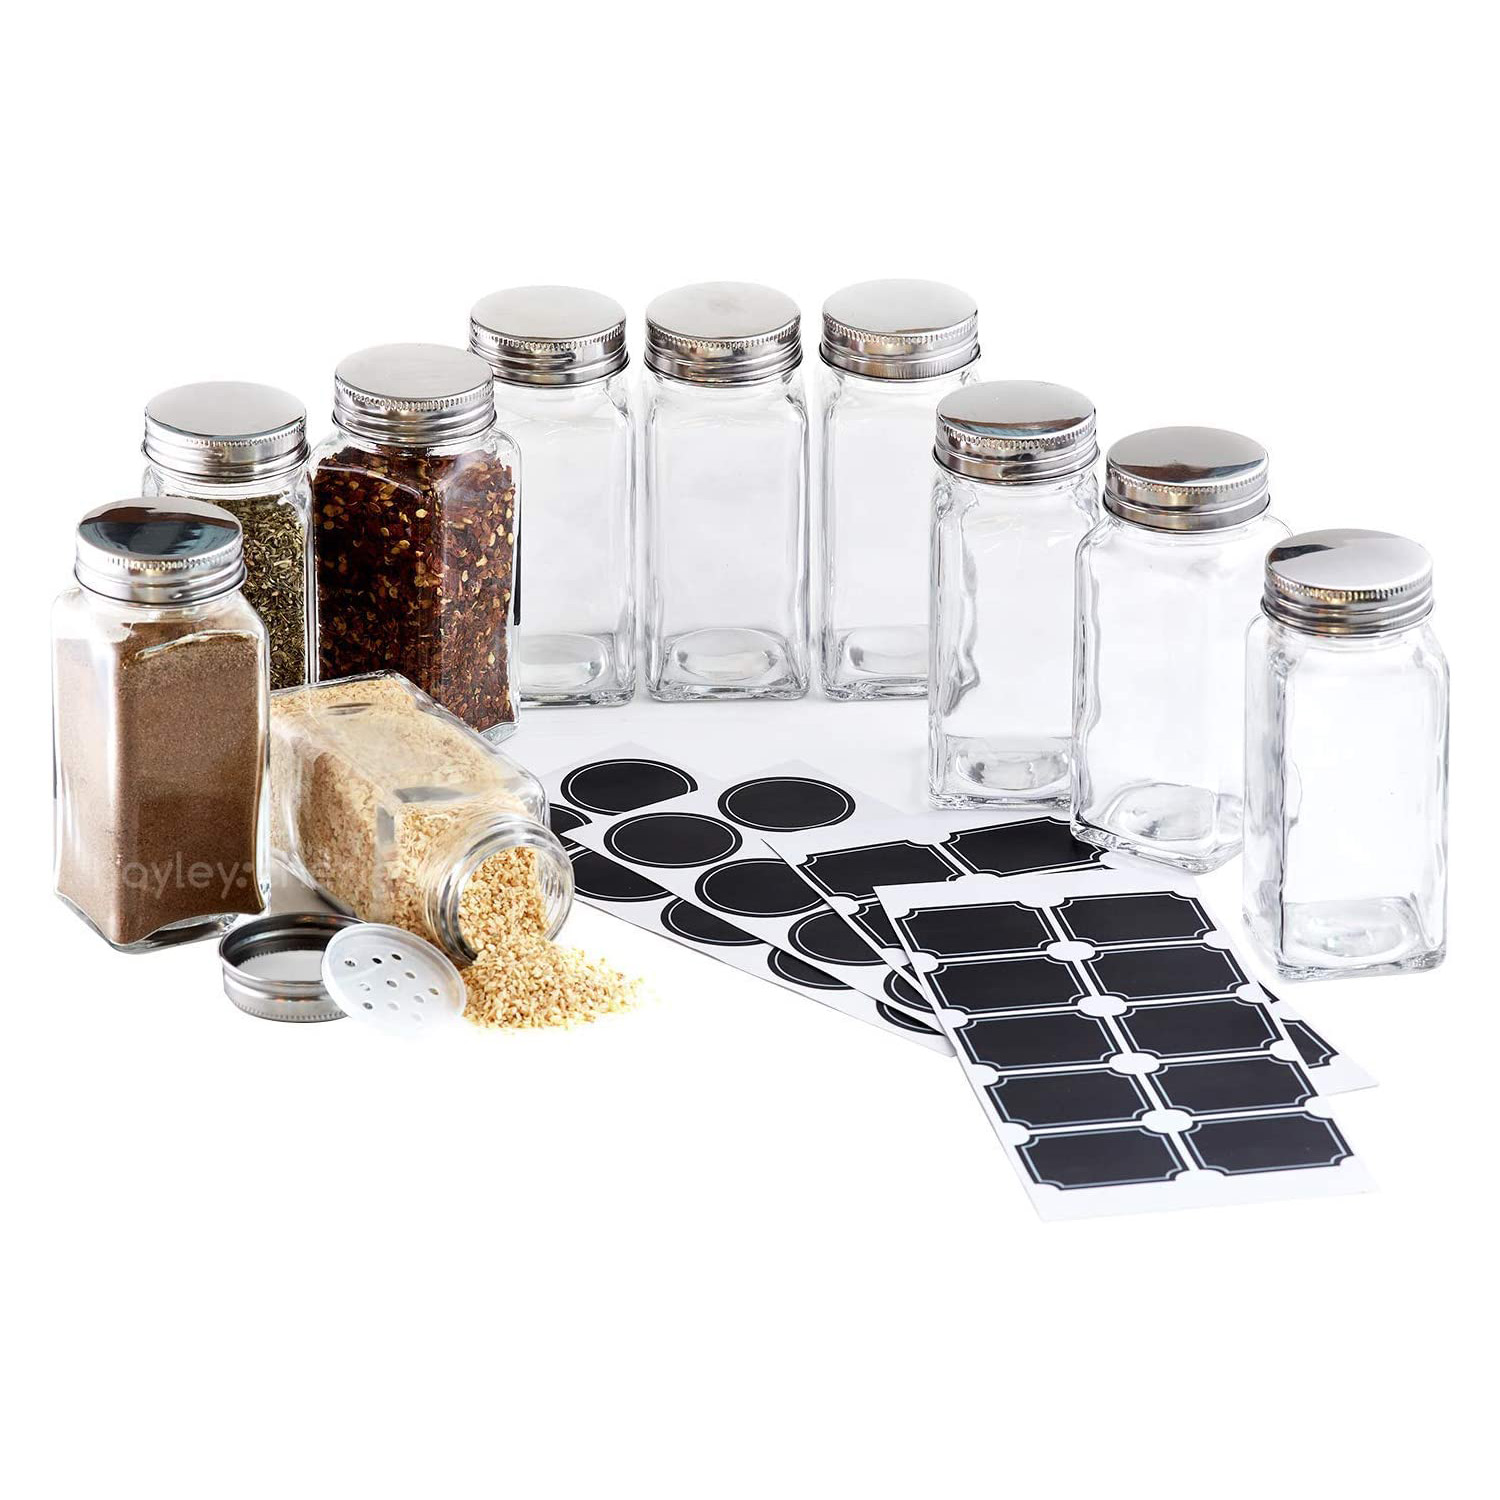 6 oz Glass French Square Spice Jar with Shaker and Your choice of